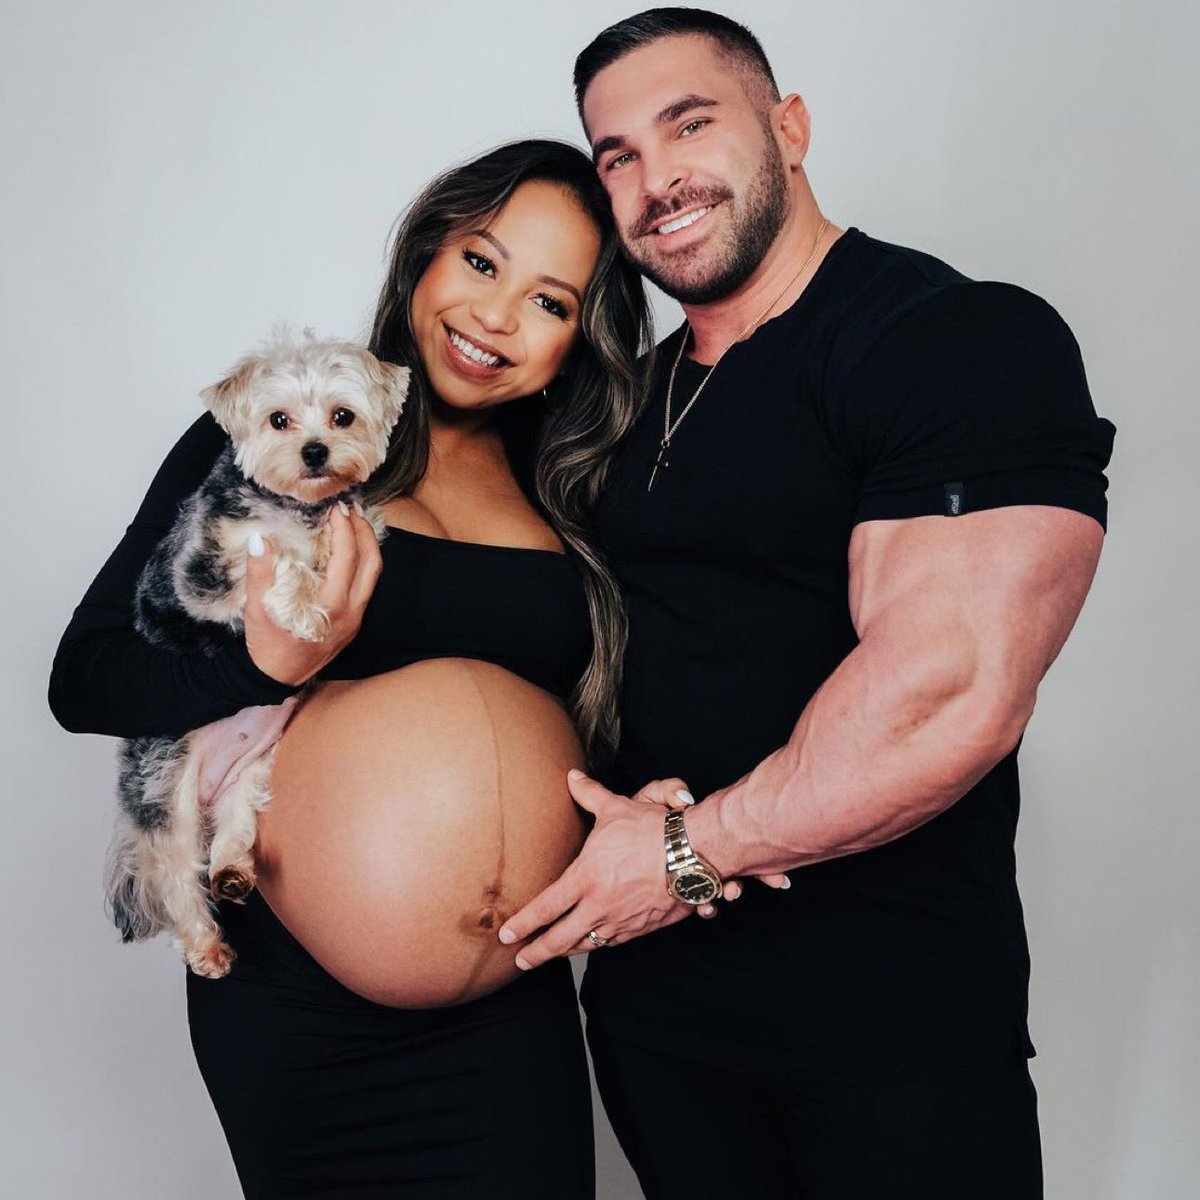 . @dereklunsford7 
Merry Christmas Eve 💗🥰
.
📸 @jontrevormedia 
.
Nala’s bookings are open for 2024 if anyone wants to hire her as a doggy model 🙆🏽‍♀️😂
.
.
.
#Maternityshoot#holidayphotos#fitfam#fitness#family#Christmaseve#39weekspregnant